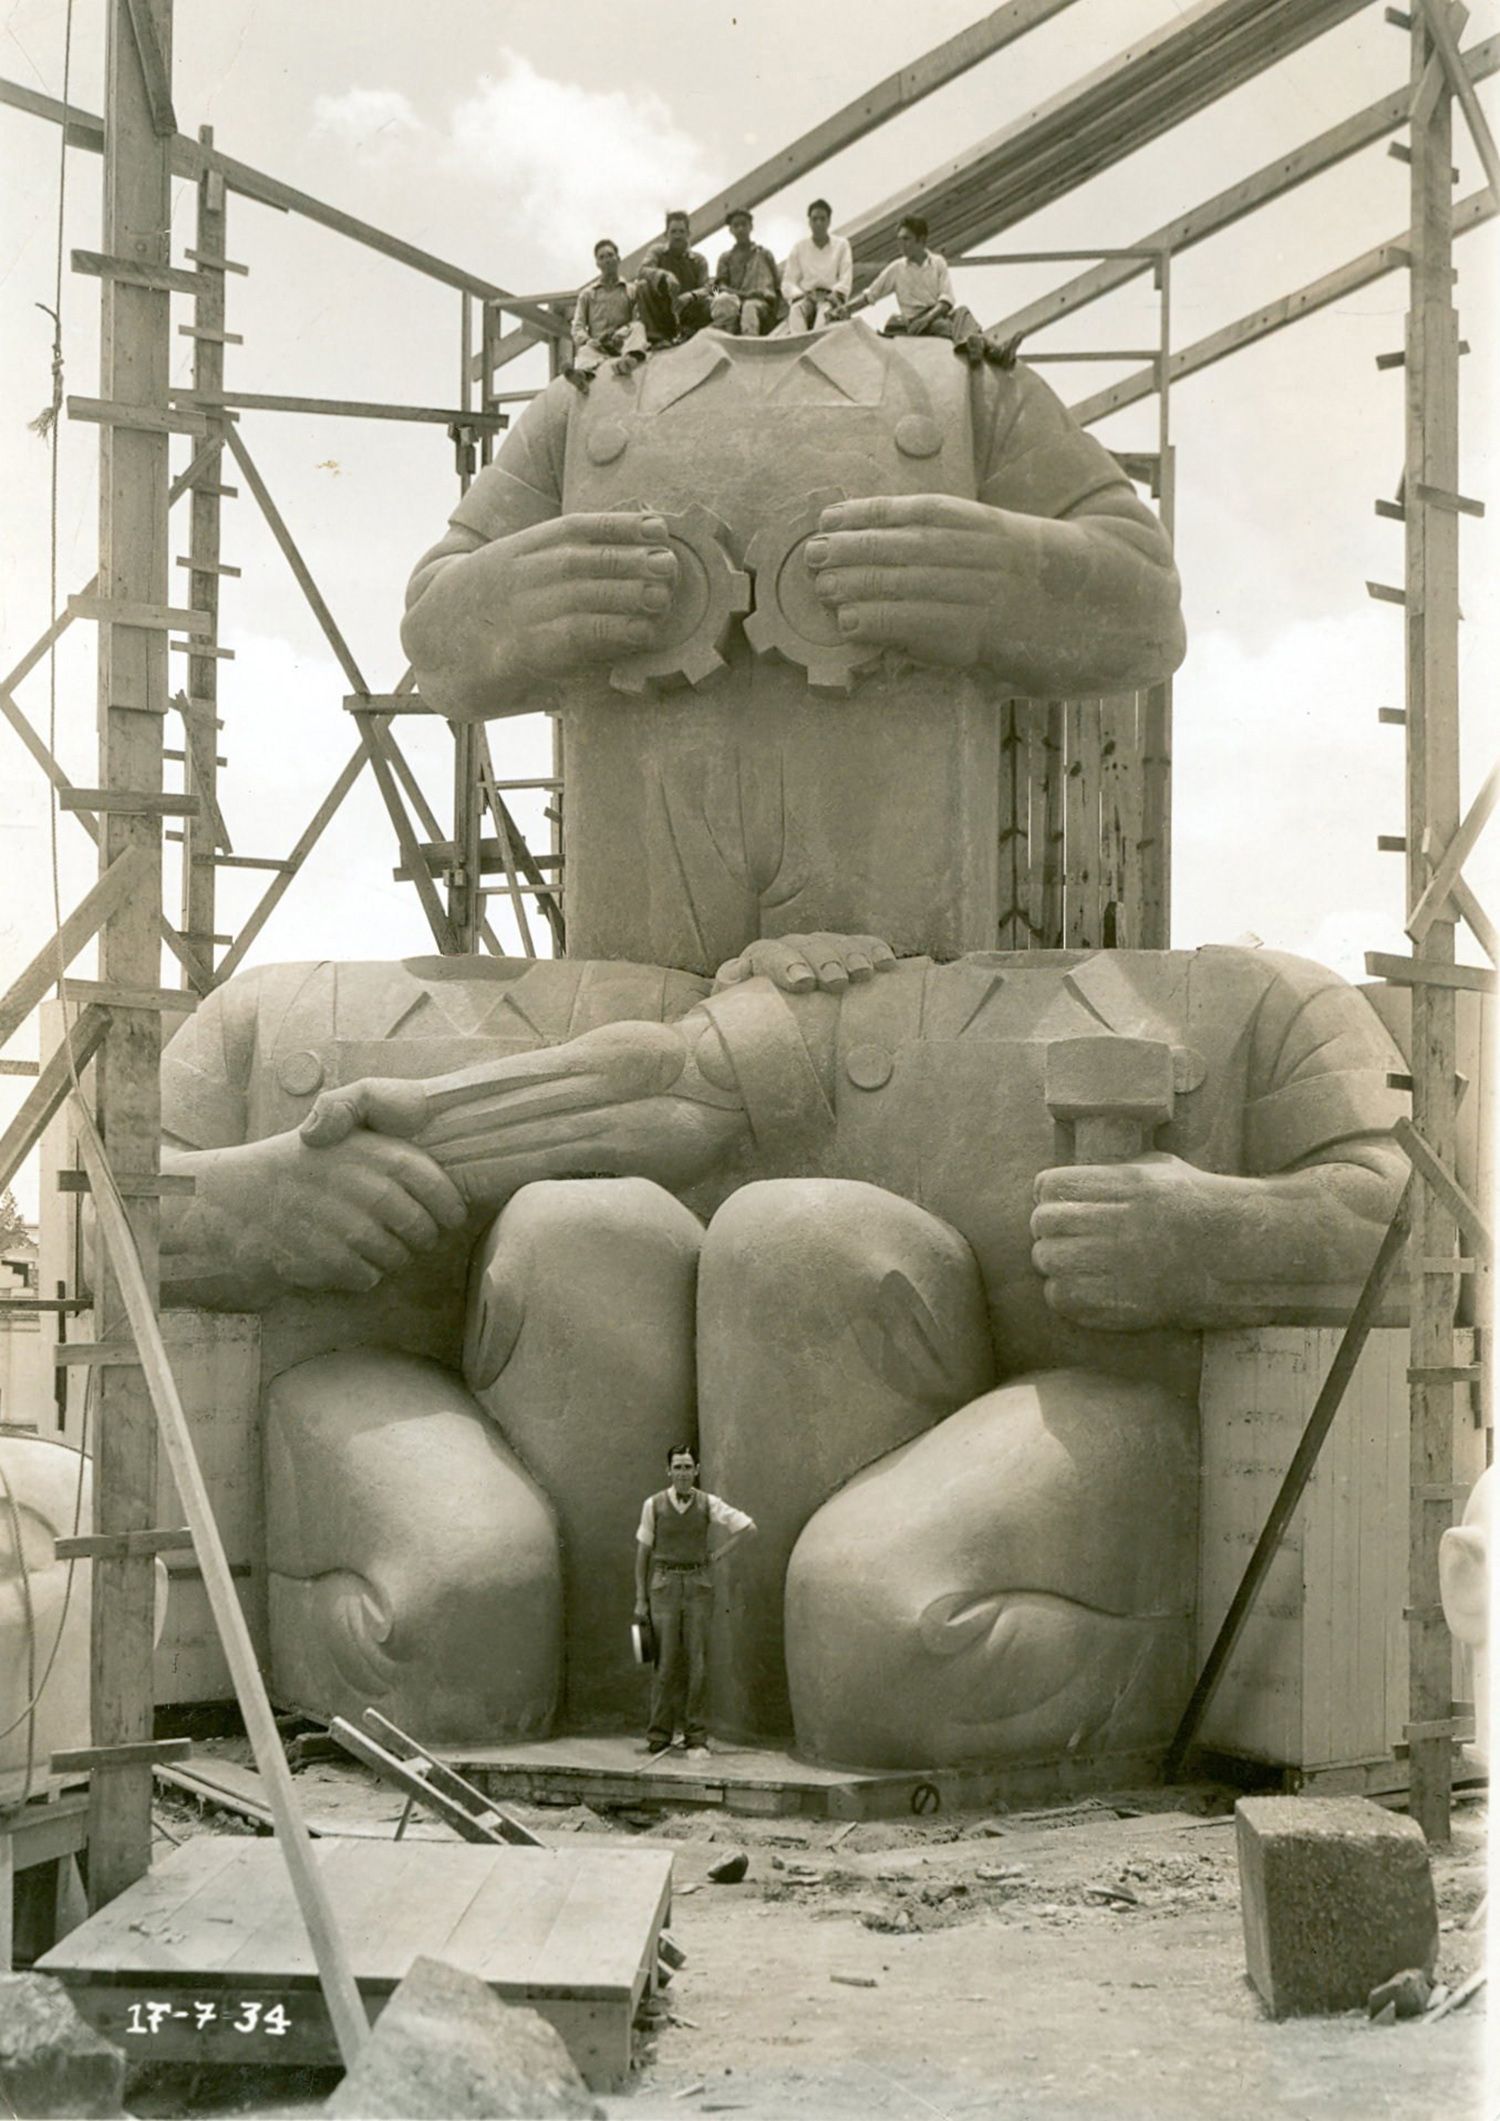 Release of the book "MONUMENTAL: The Public Dimension of Sculpture 1927-1979" by Pedro Reyes